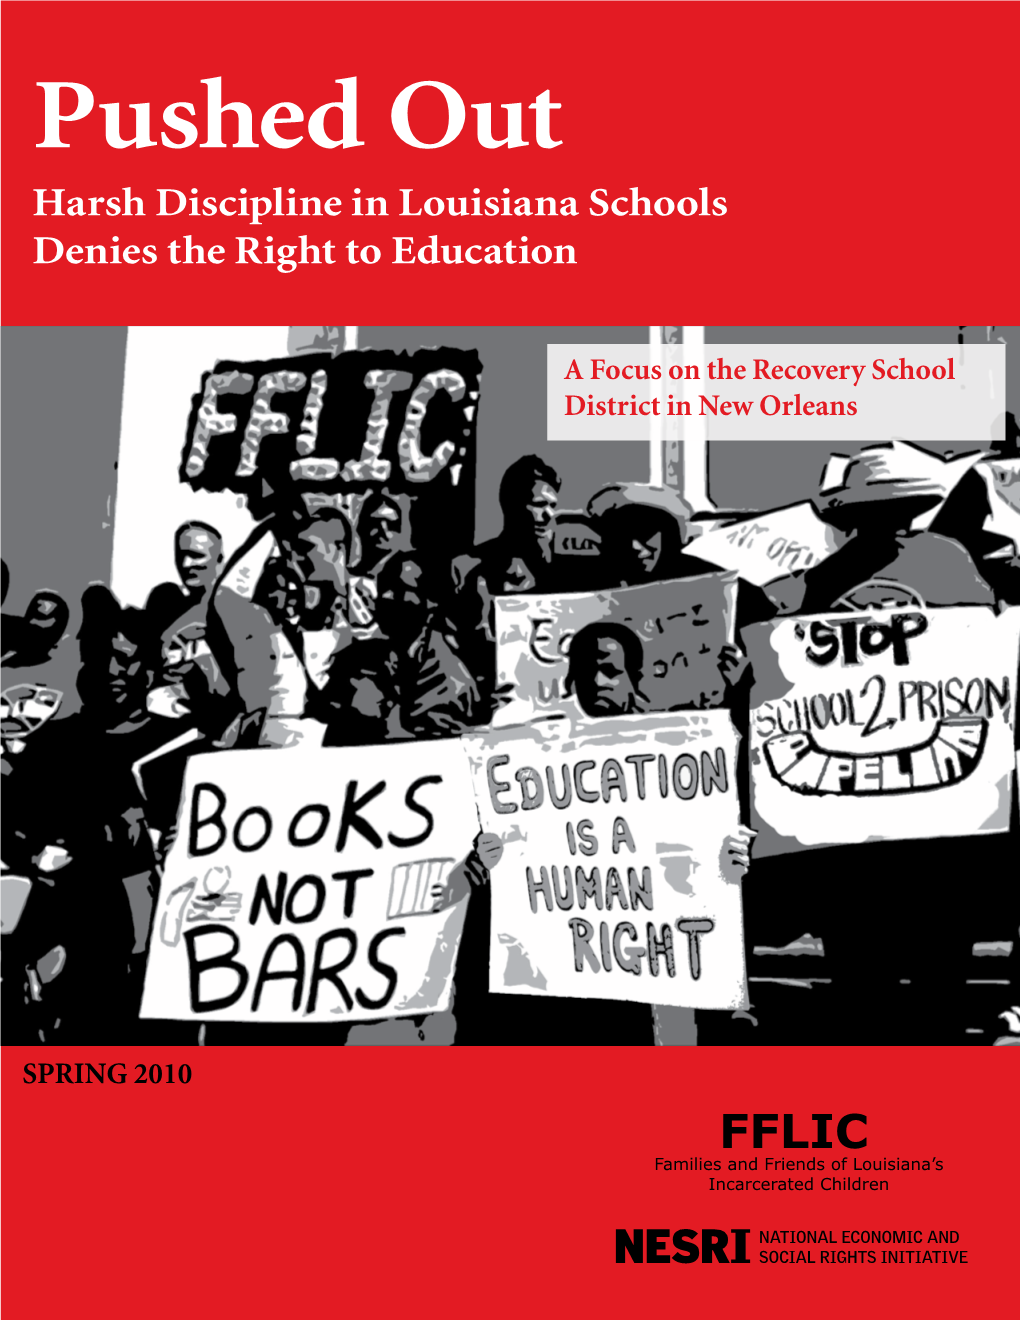 Pushed Out: Harsh Discipline in Louisiana Schools Denies the Right